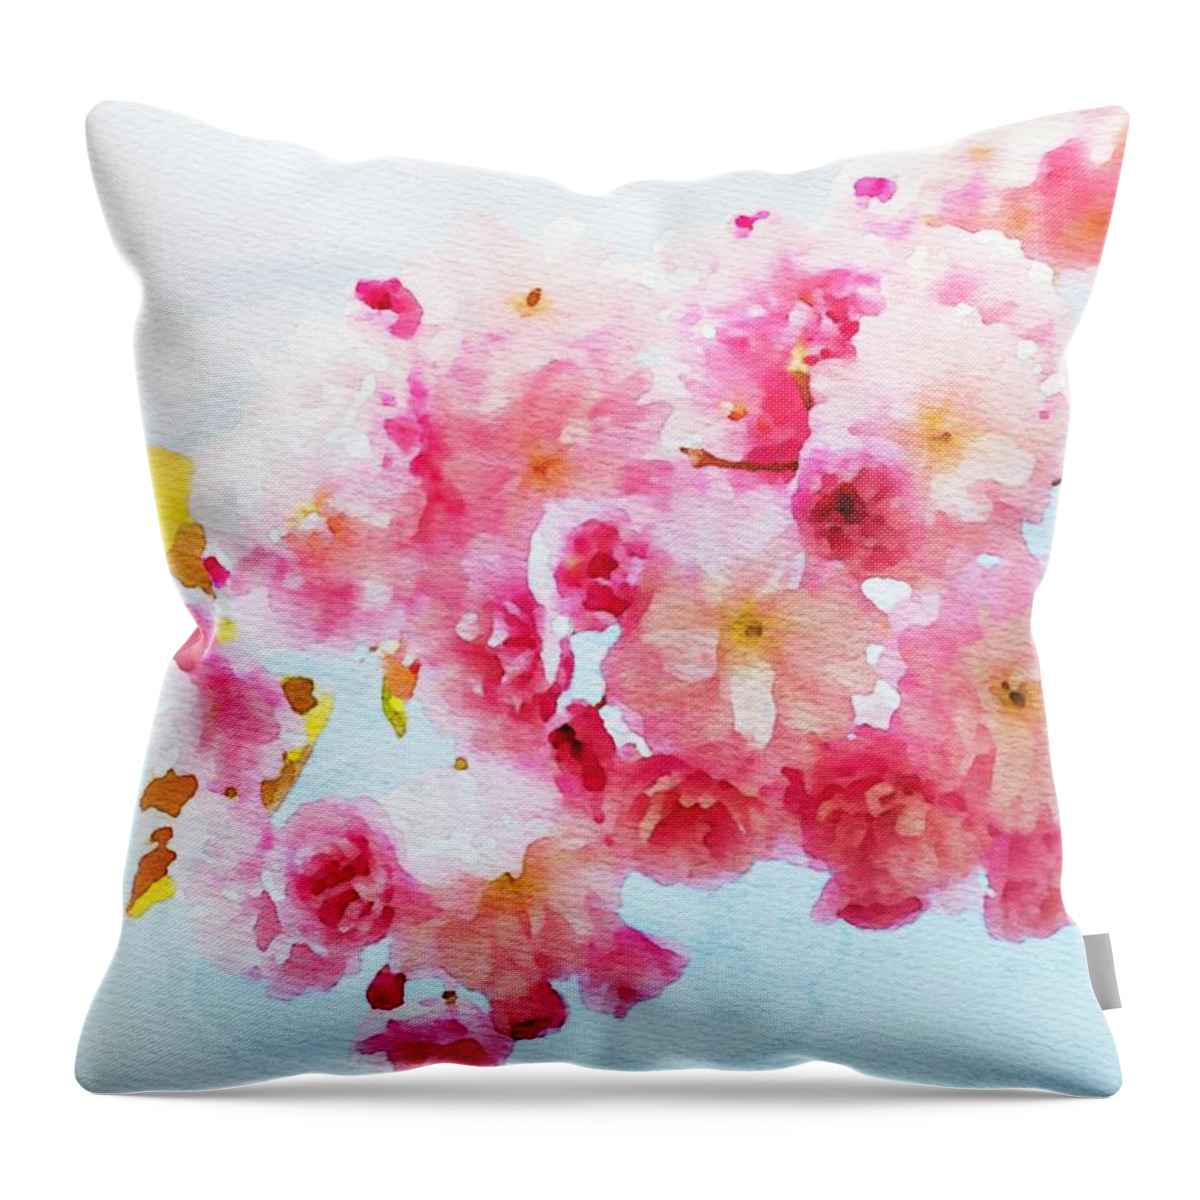 Cherry Blossoms Throw Pillow featuring the painting Cherry Blossoms by Watercolor